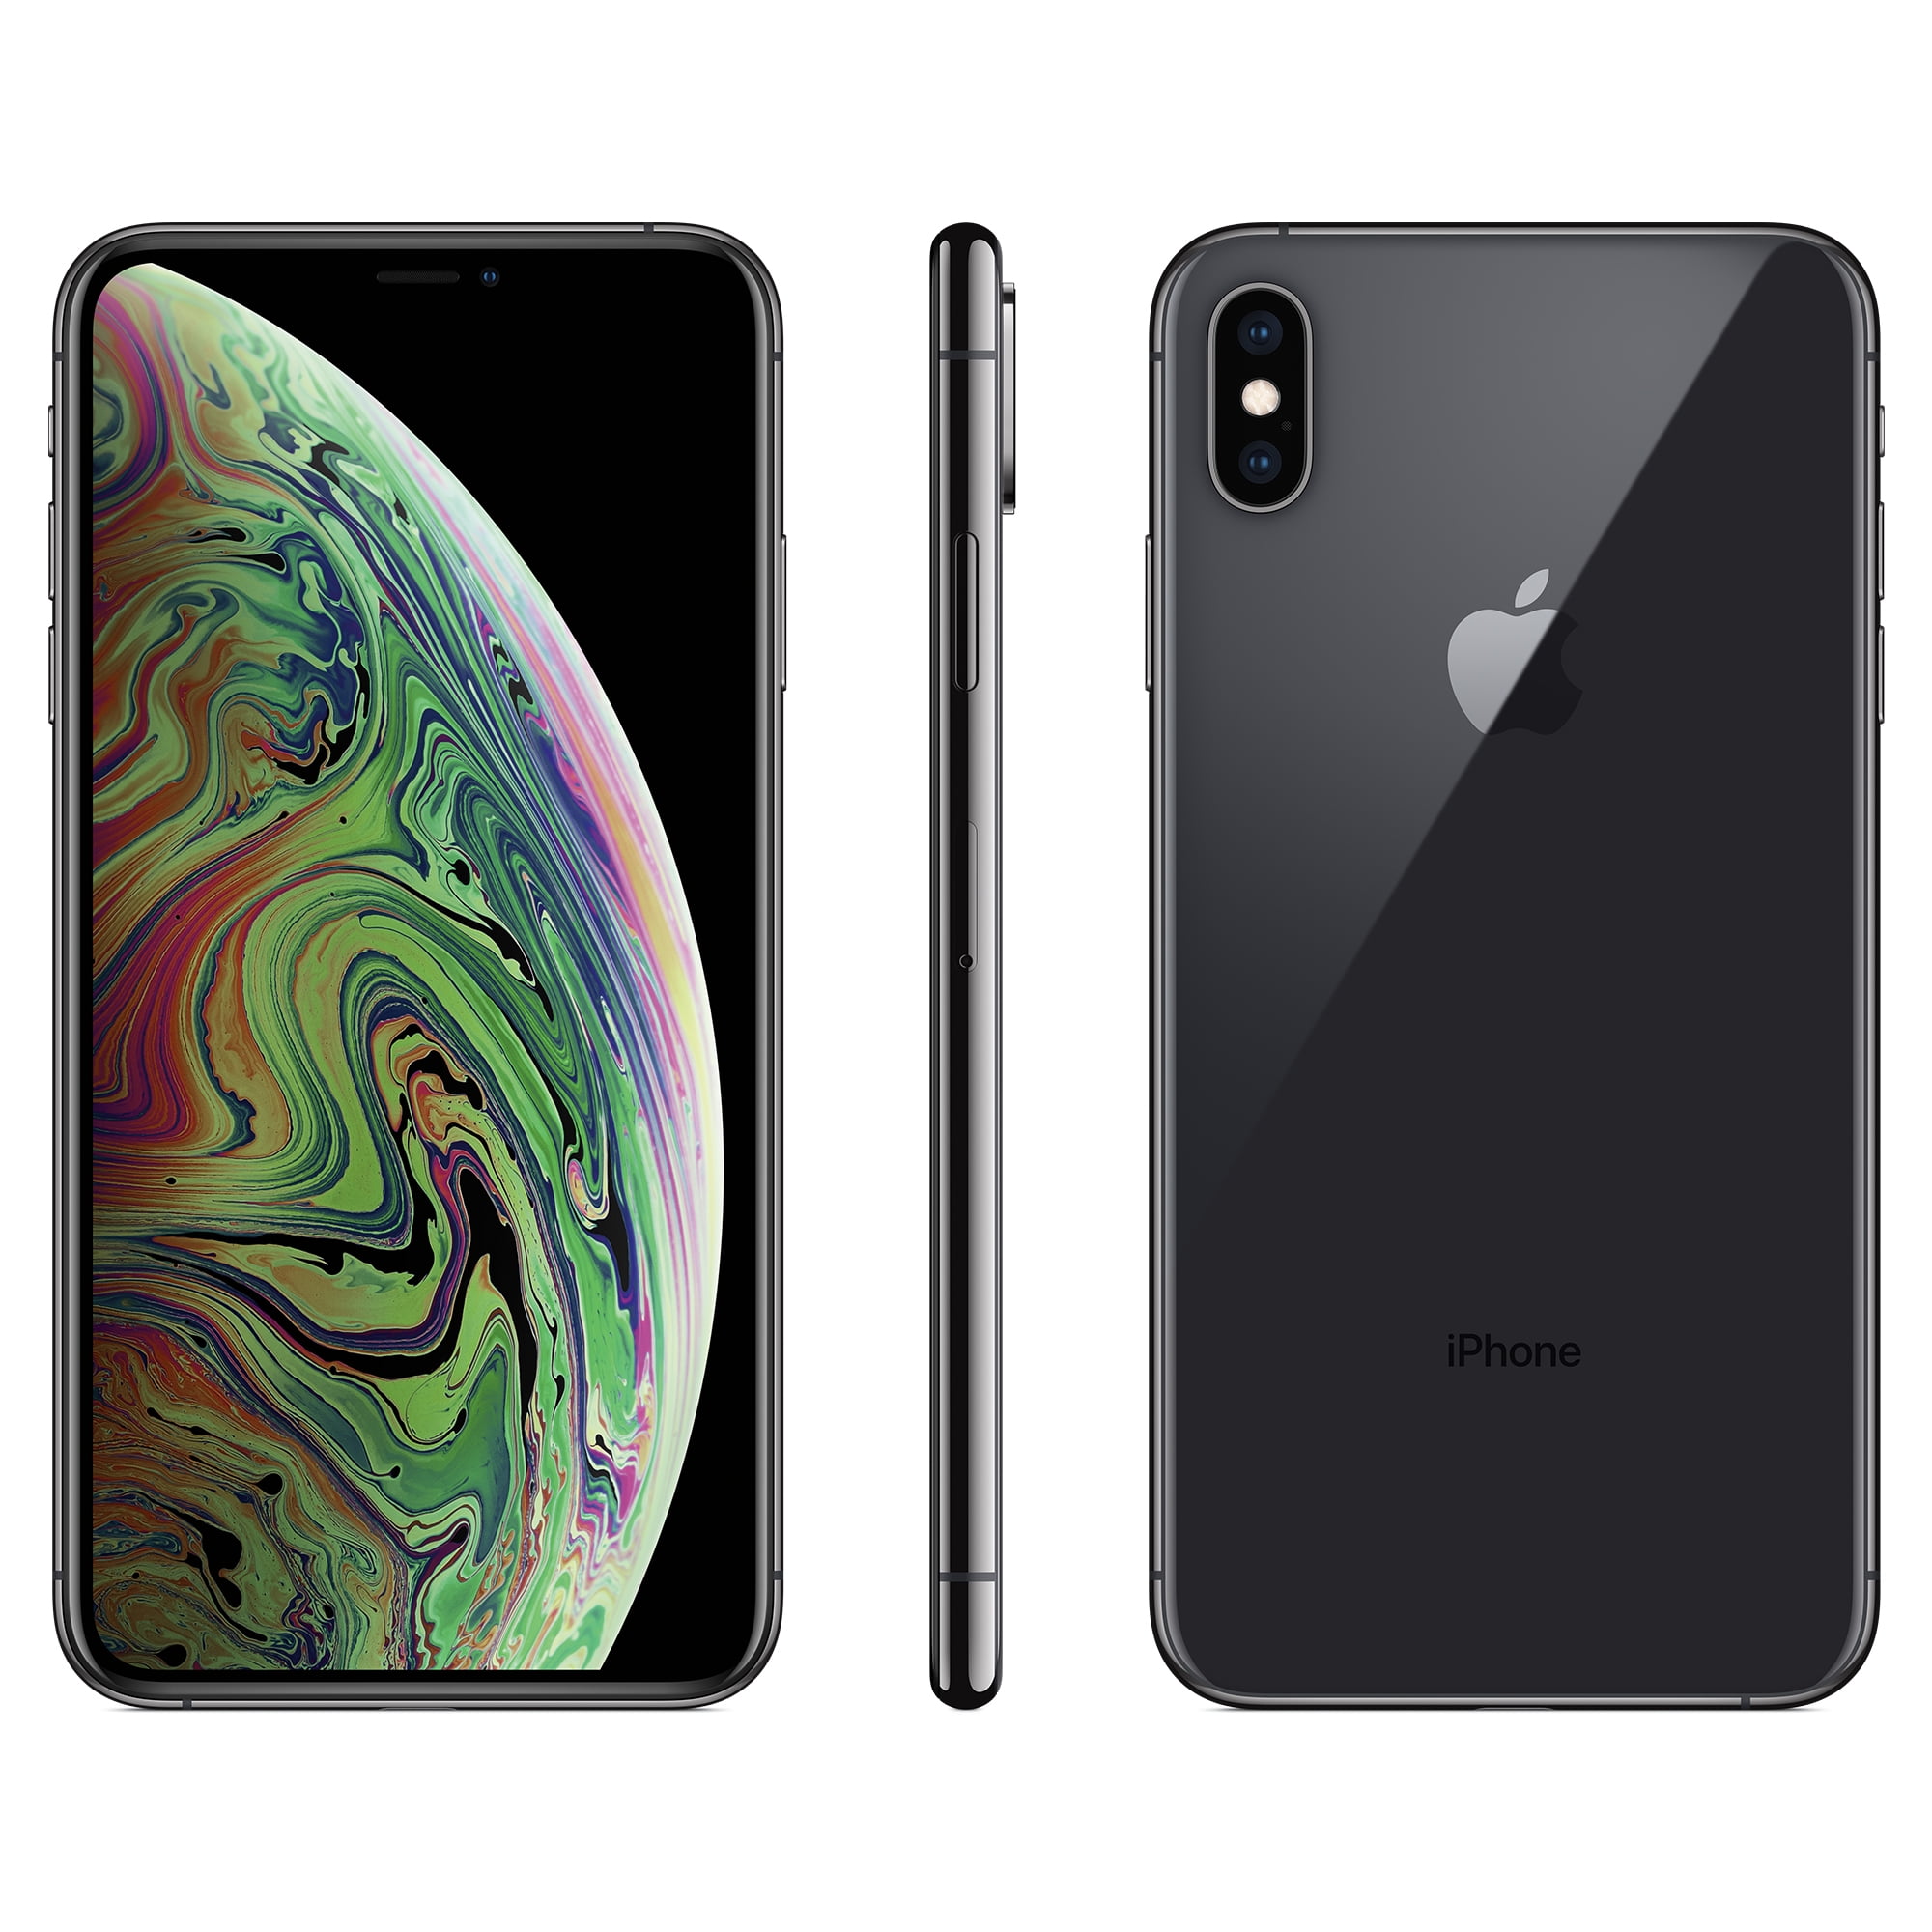 Apple iPhone XS Max 256GB Space Gray B Grade Used Fully Unlocked Smartphone